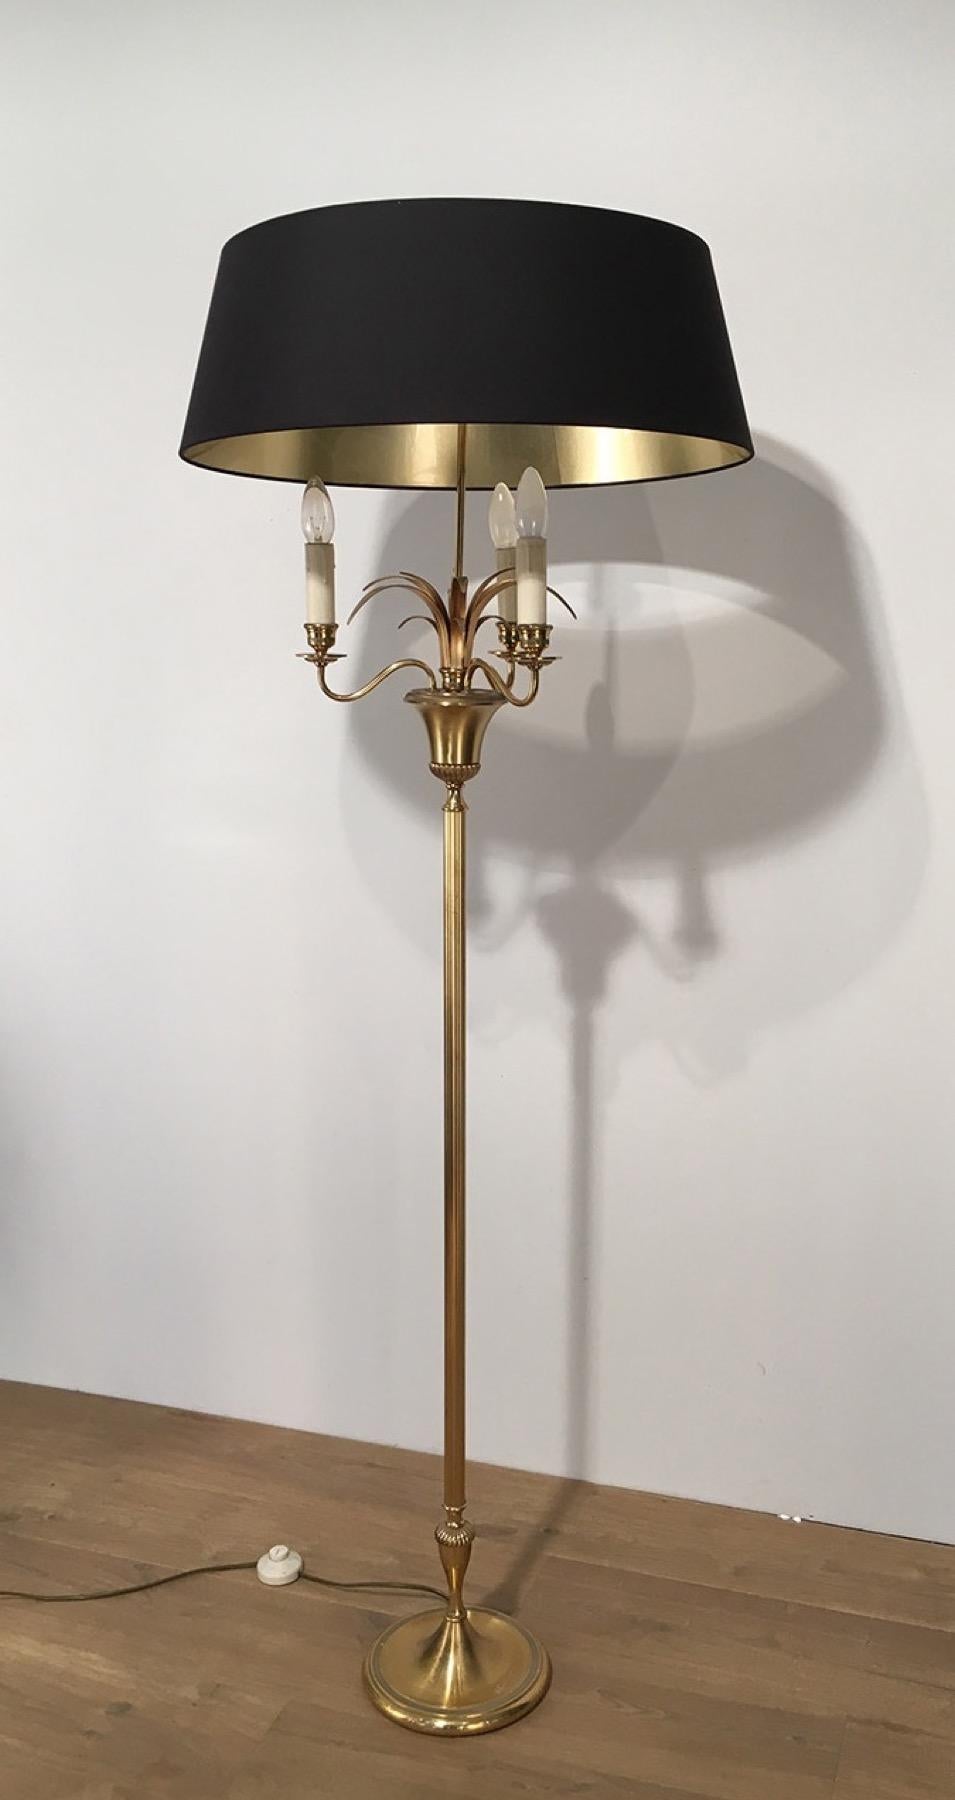 Pineapple Brass Floor Lamp in the Style of Maison Charles, Circa 1970 For Sale 11